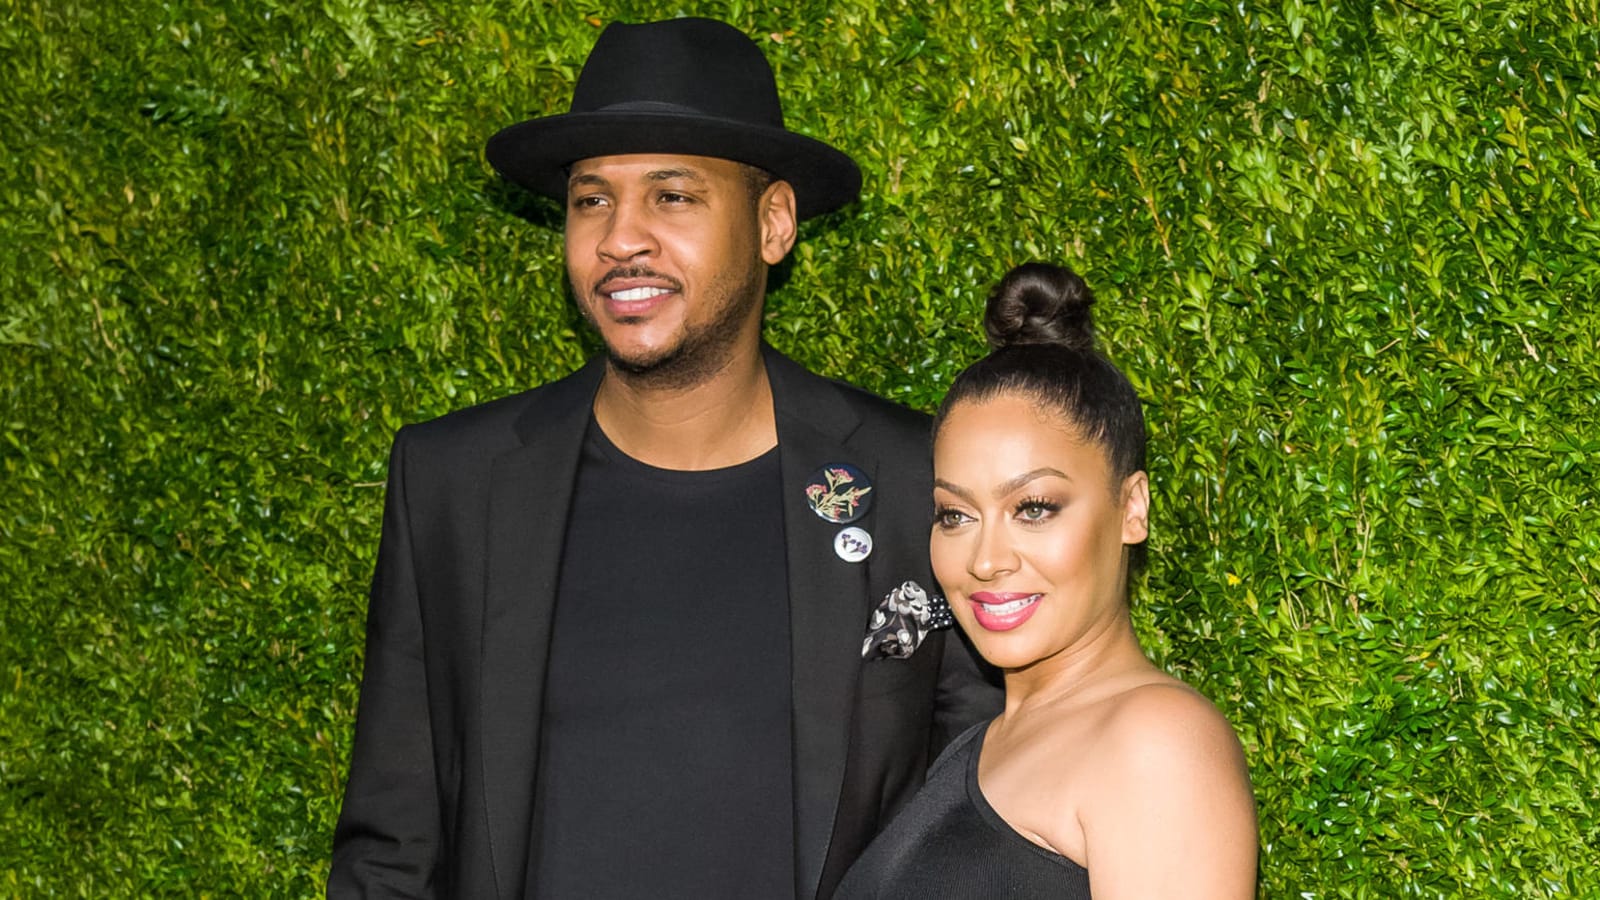 La La Anthony officially files for divorce from Carmelo